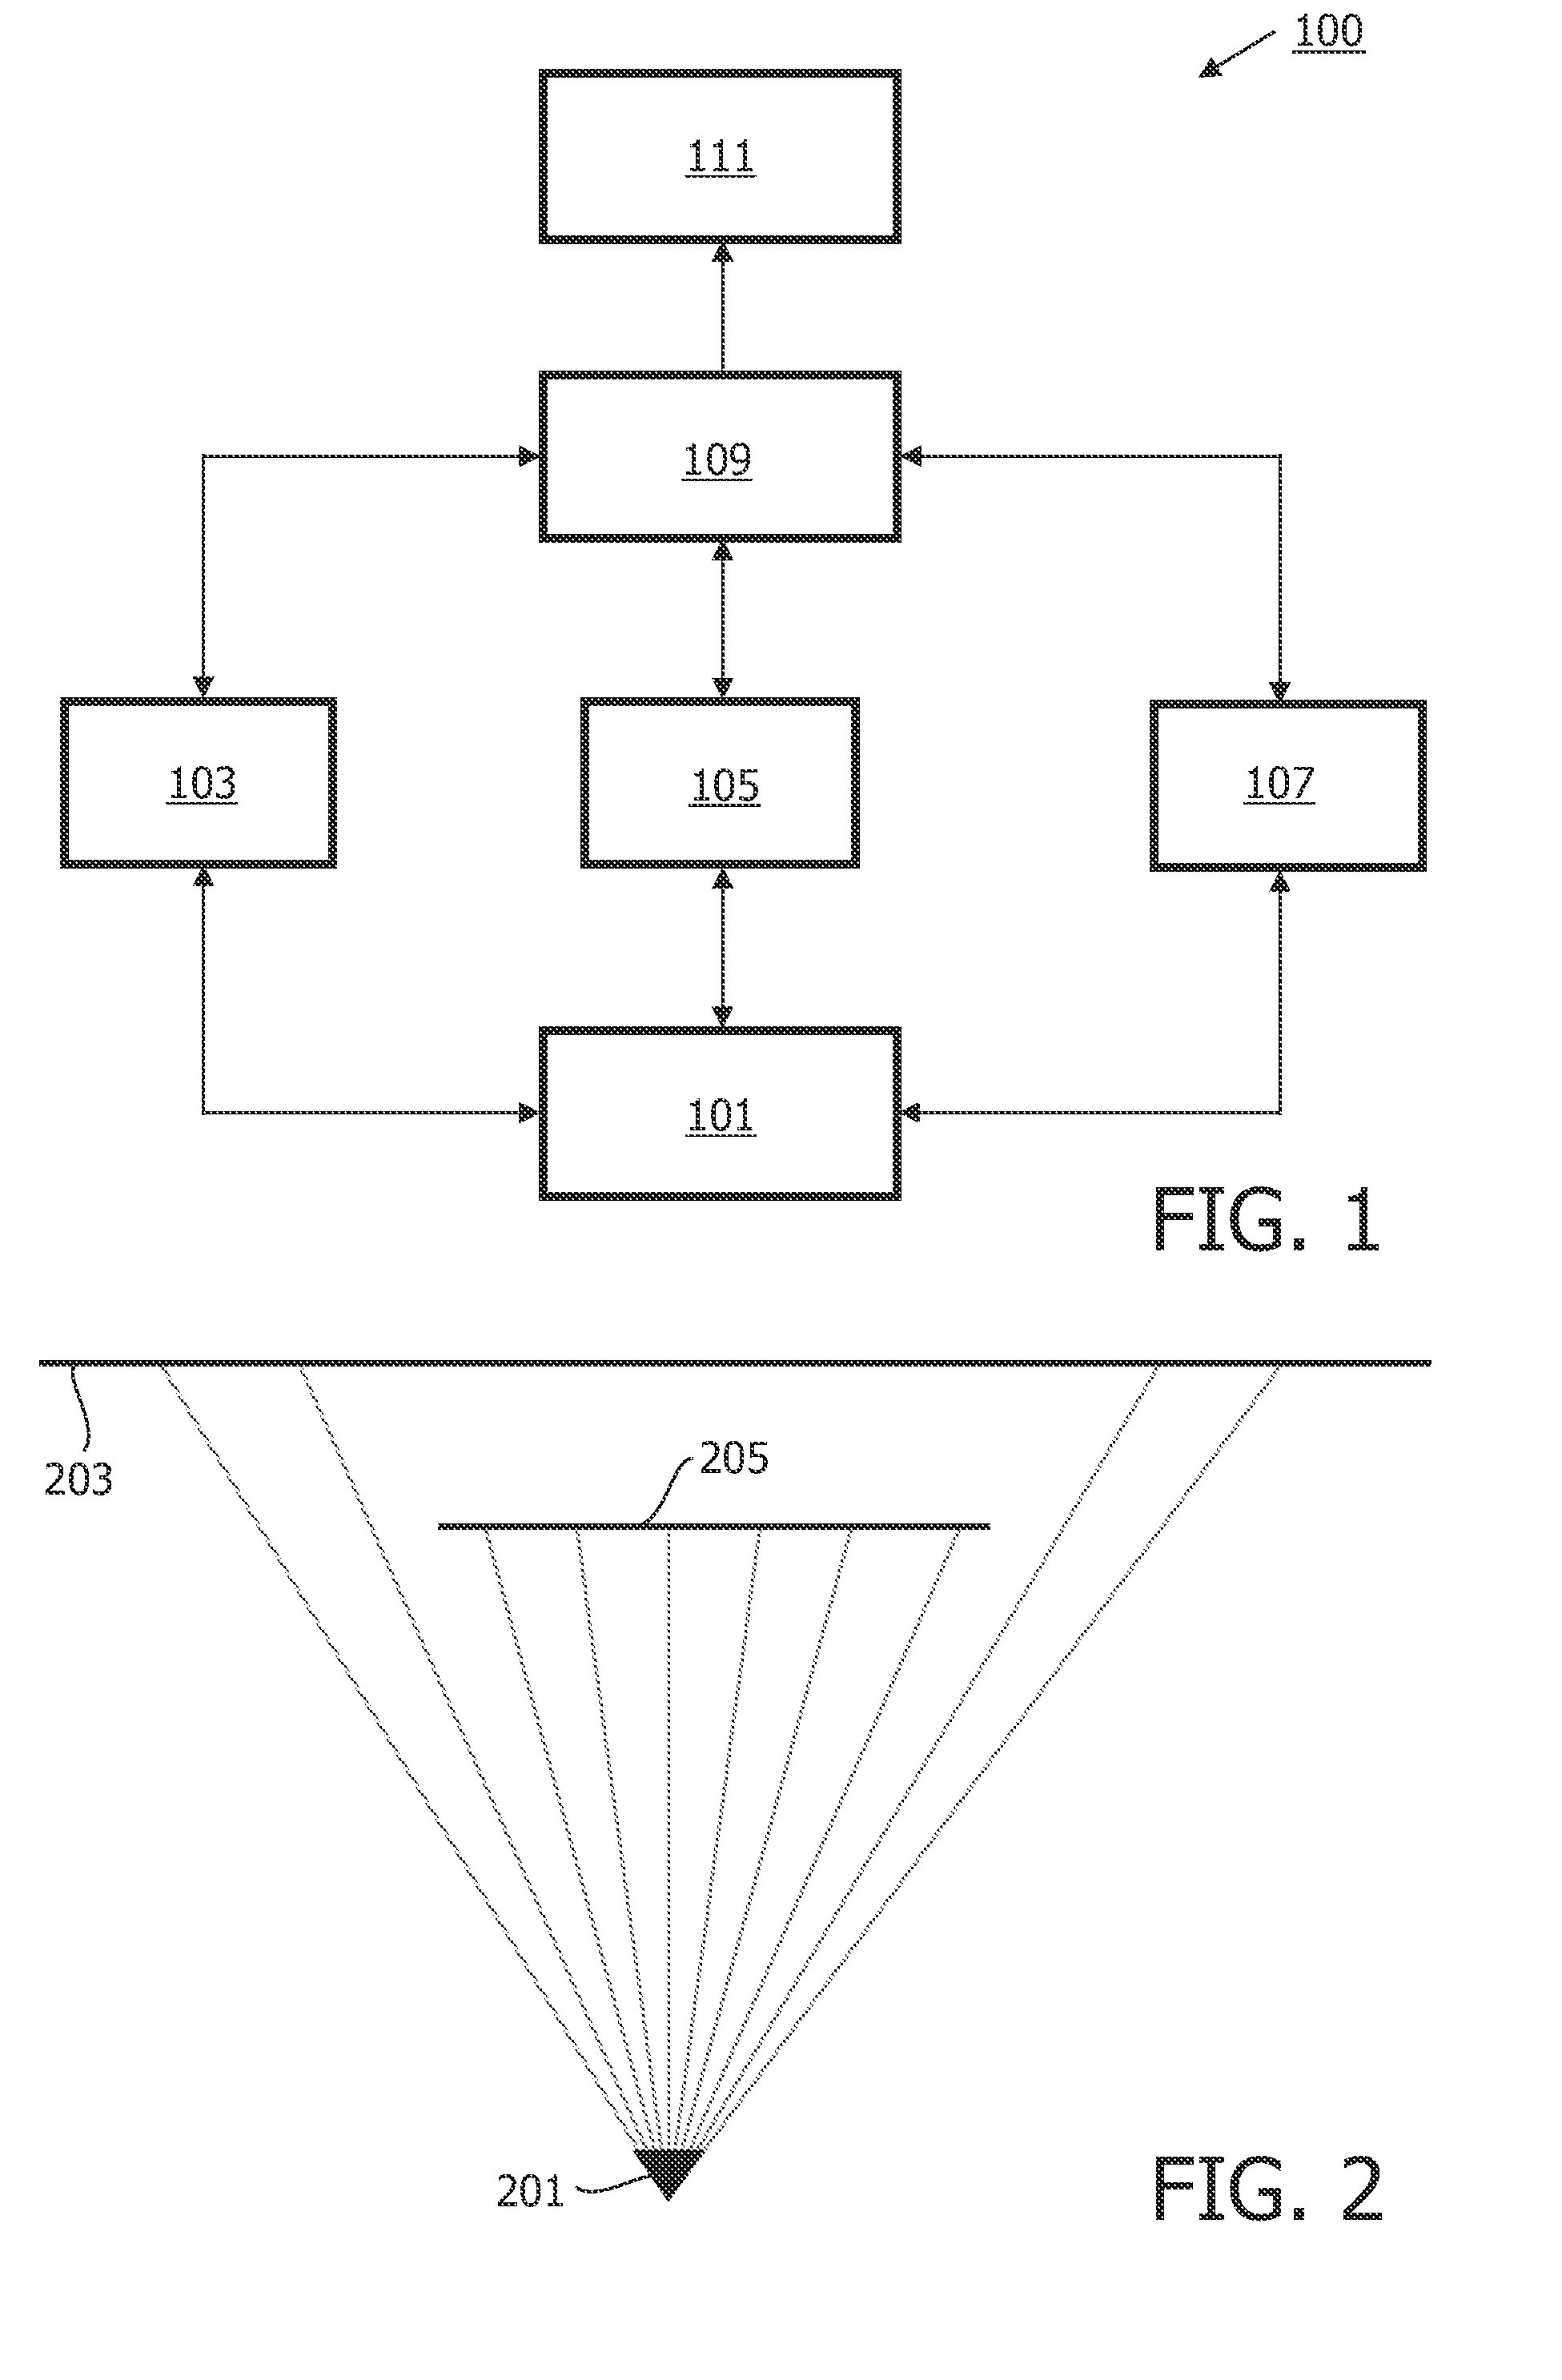 Generation of occlusion data for image properties